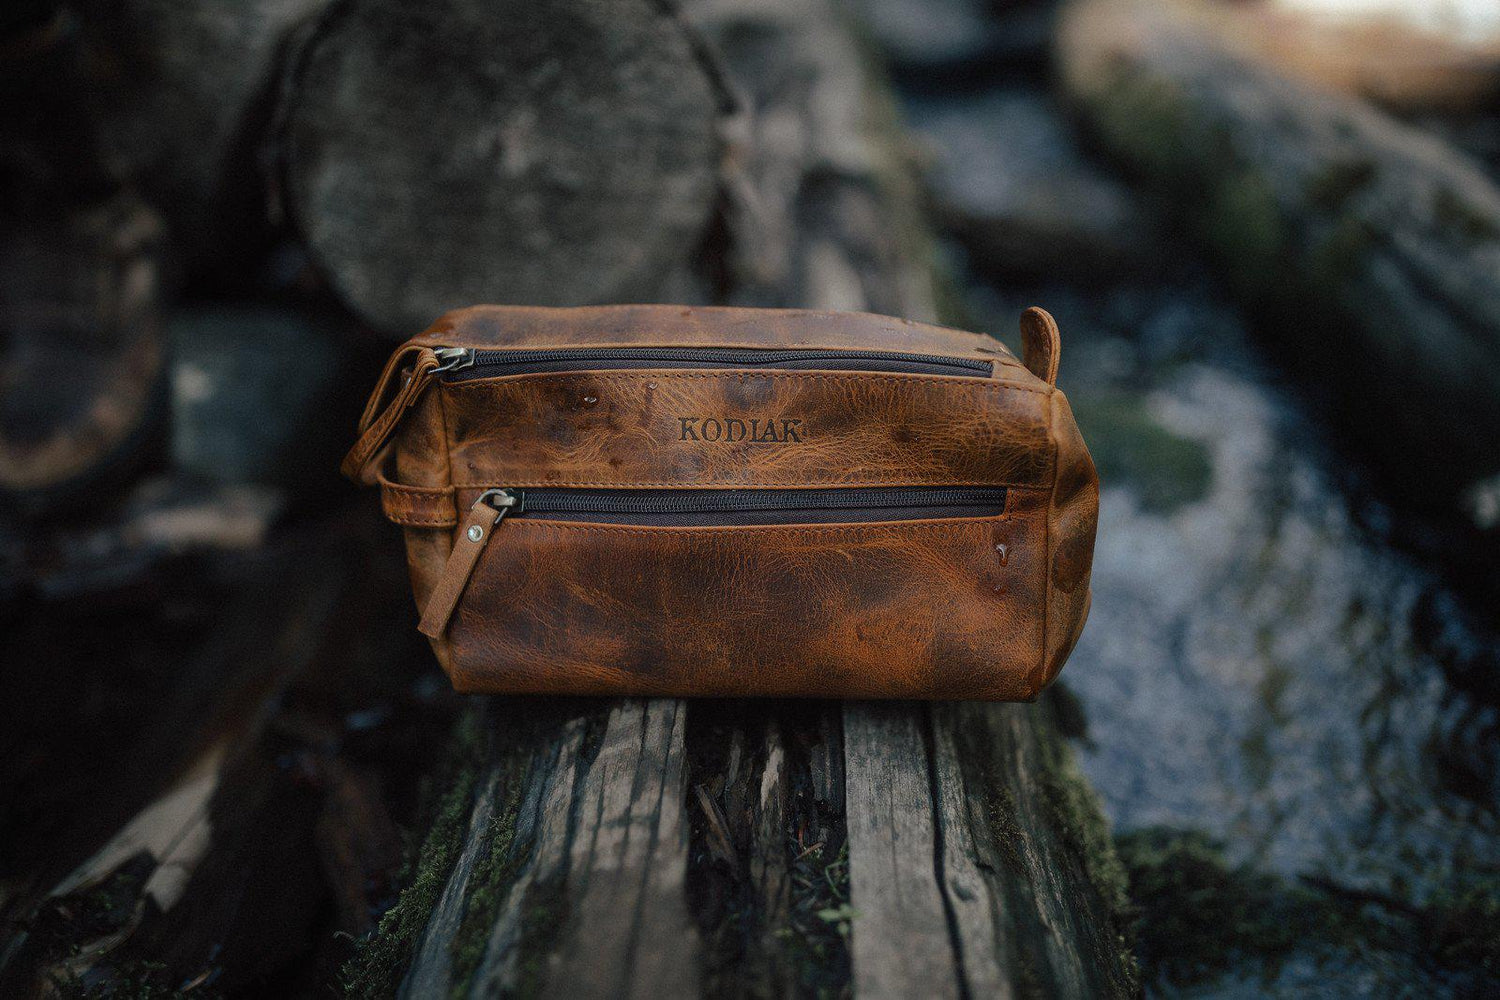 Double Pocket Leather Toiletry Bag